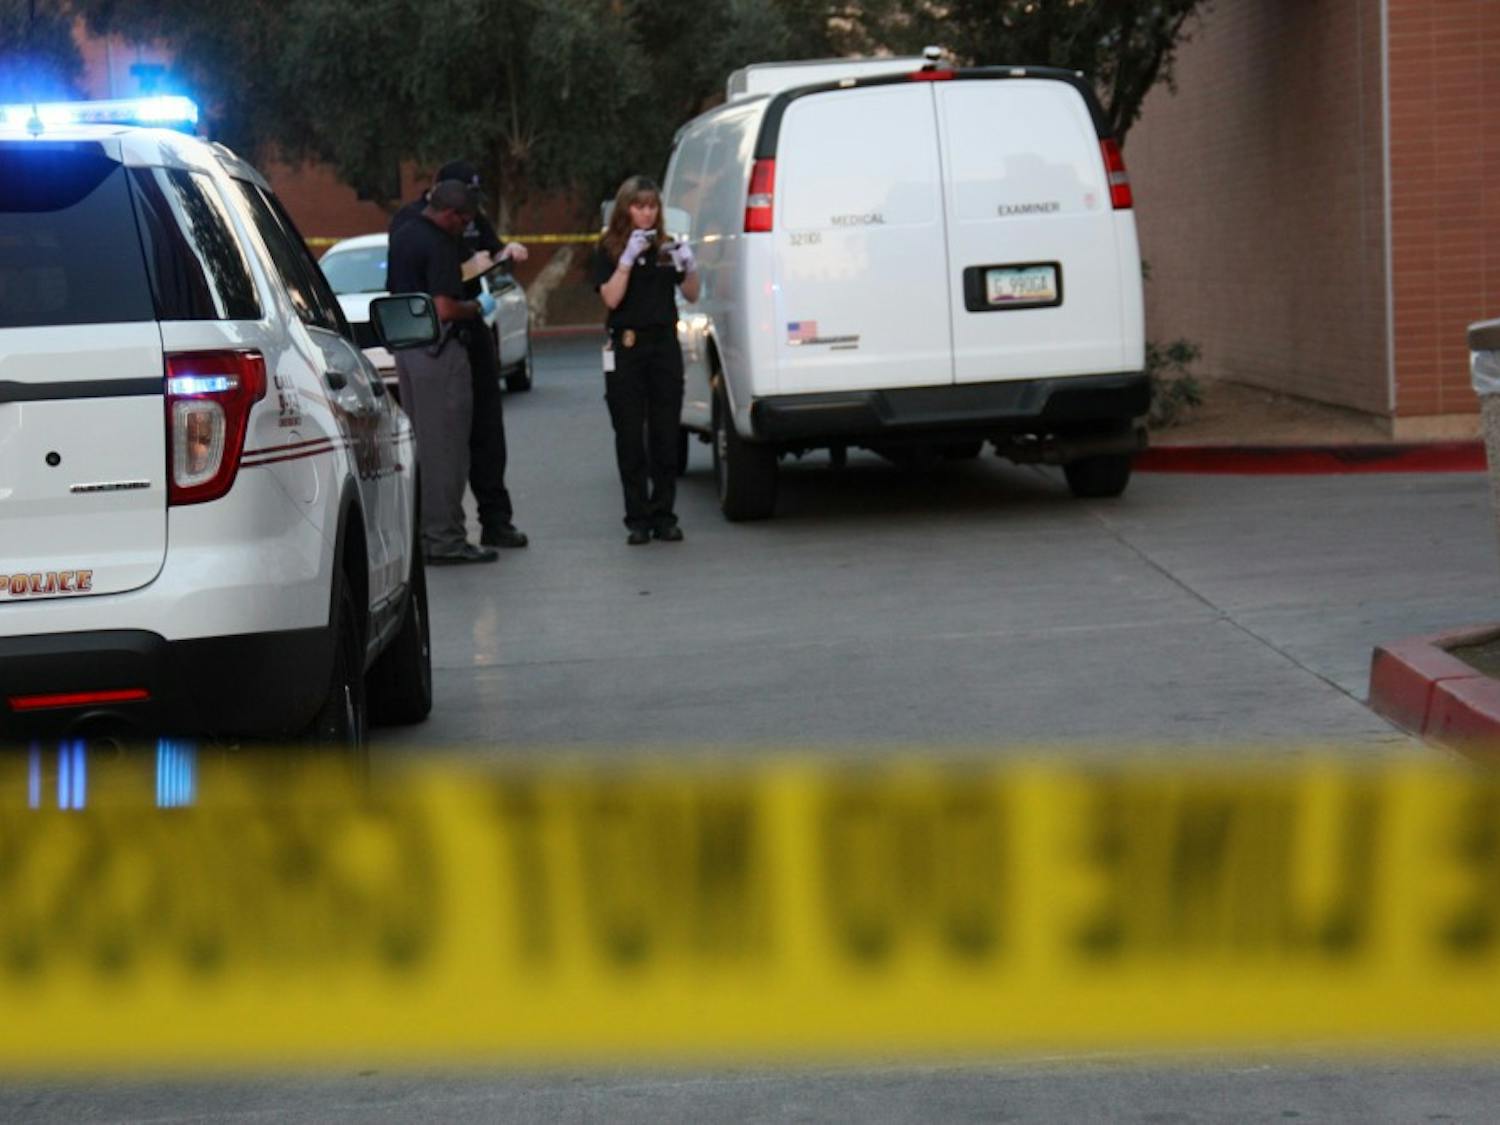 ASU Police responded to the death of an ASU student Tuesday afternoon at the Goldwater Center. (Photo by Shawn Raymundo)